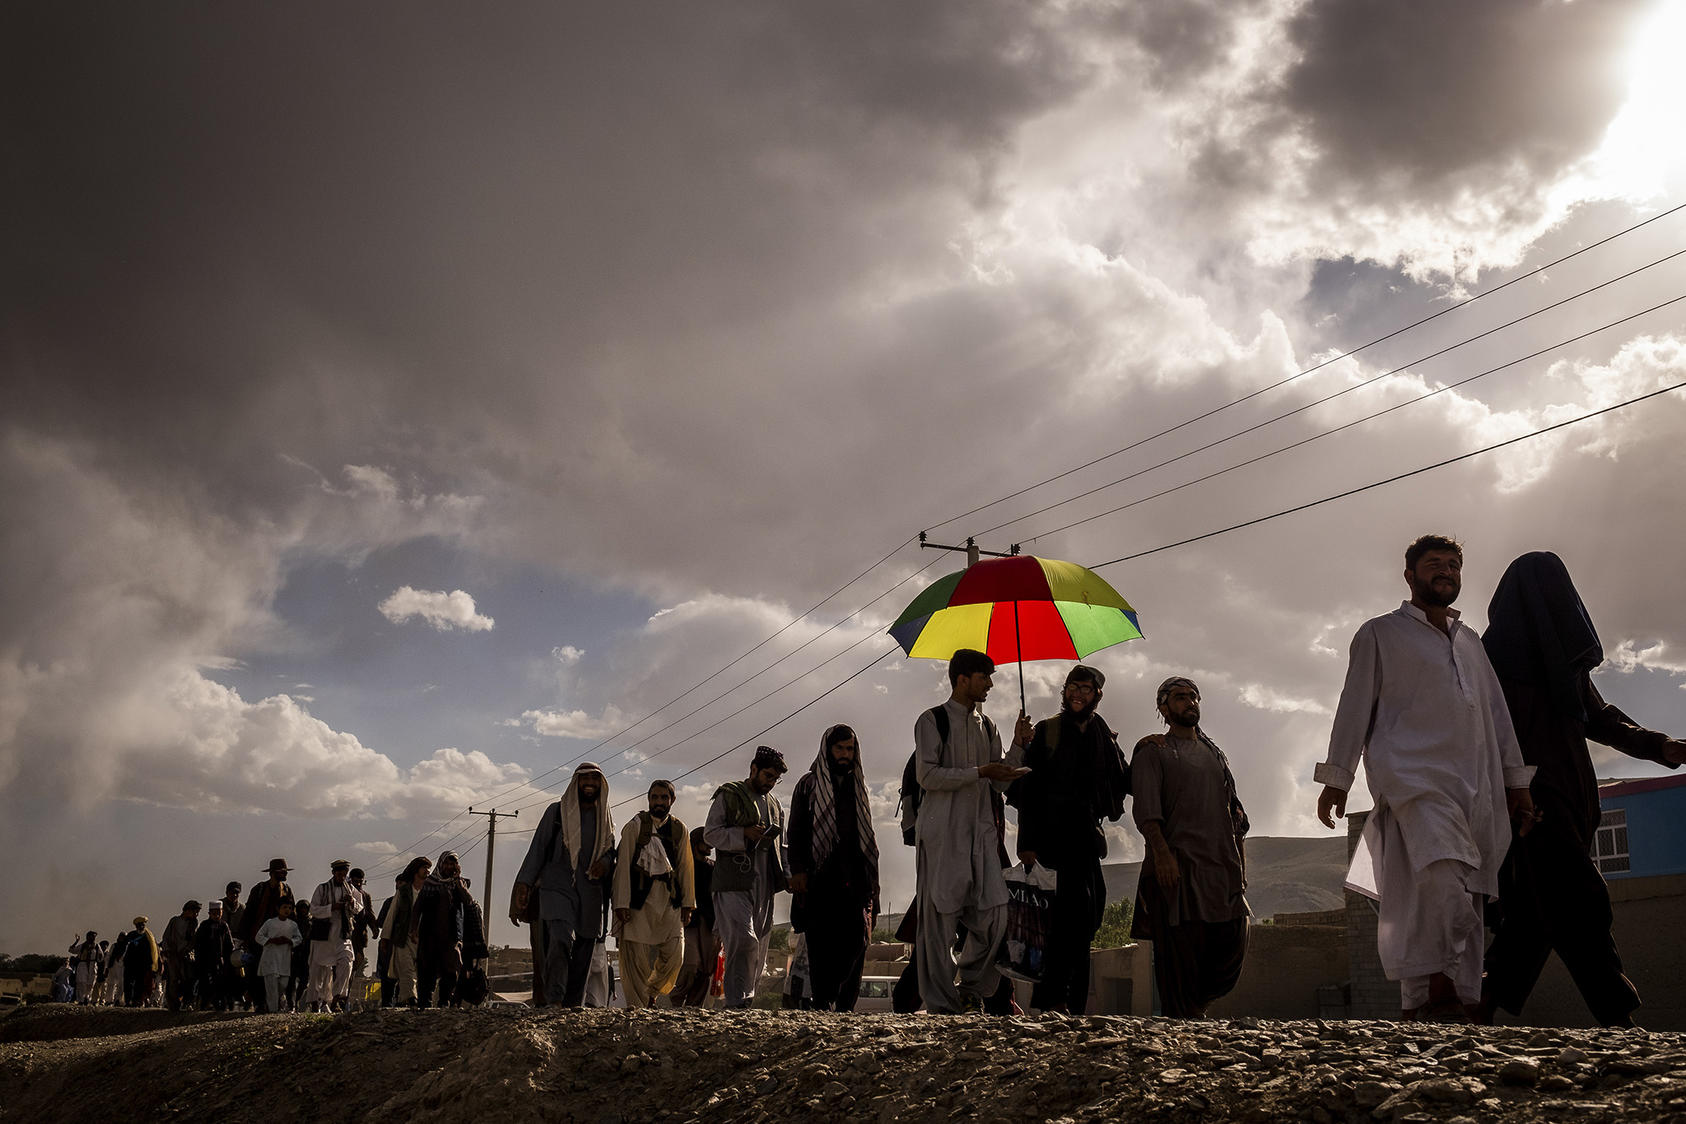 Afghan activists march toward Taliban-controlled territory in Helmand province to ask for a halt to the country’s violence, June 2, 2019. (People's Peace Movement via The New York Times)